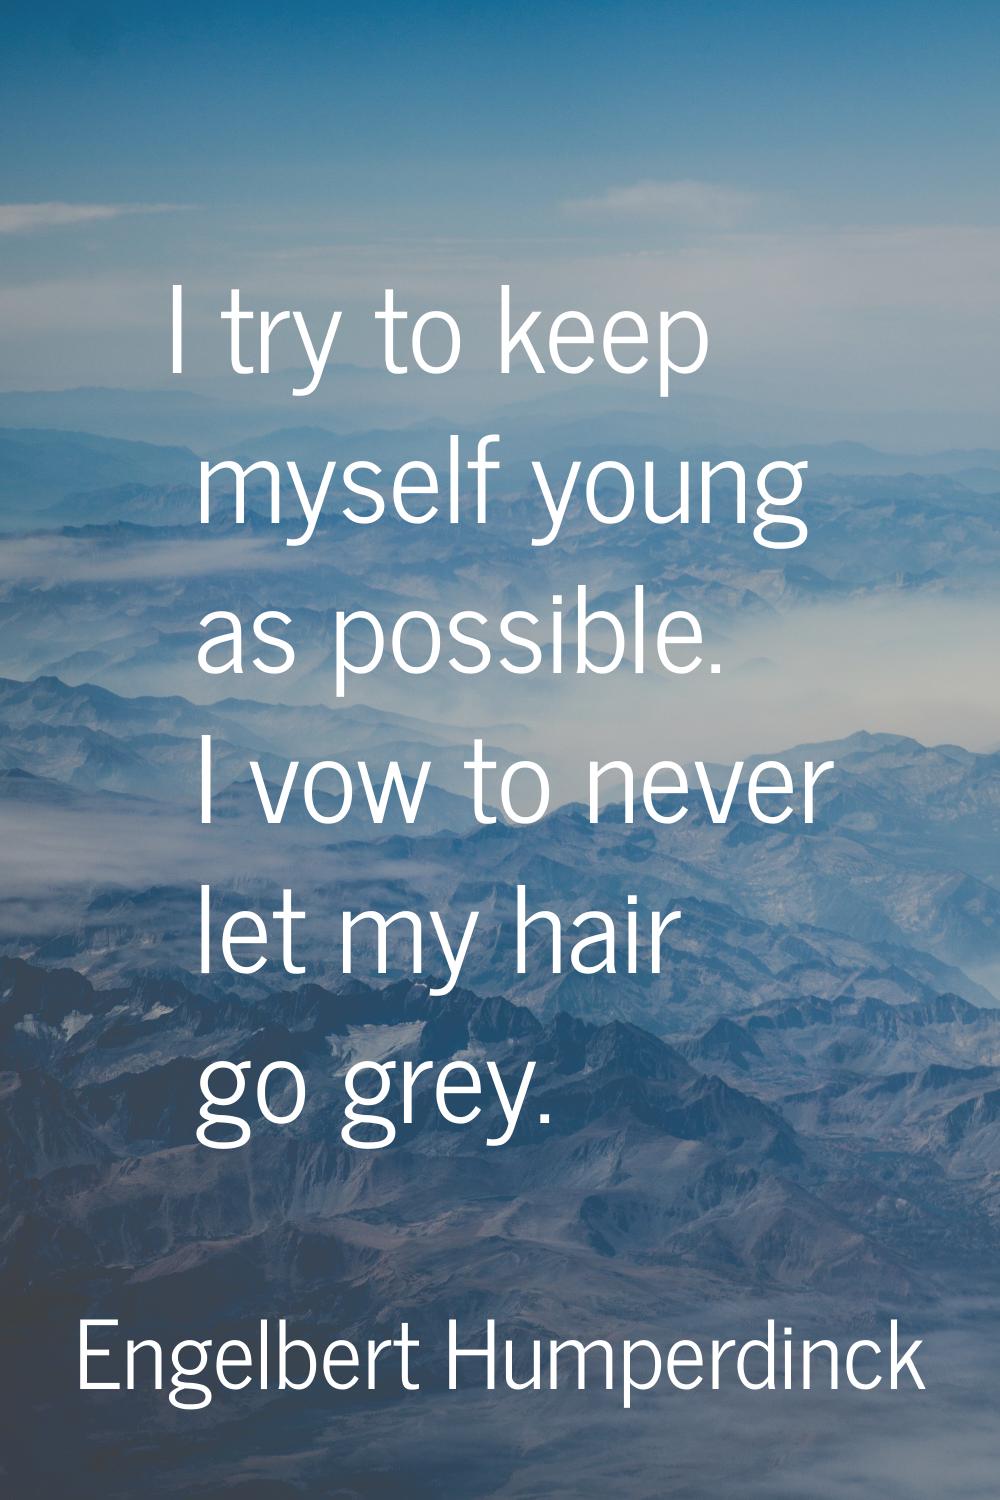 I try to keep myself young as possible. I vow to never let my hair go grey.